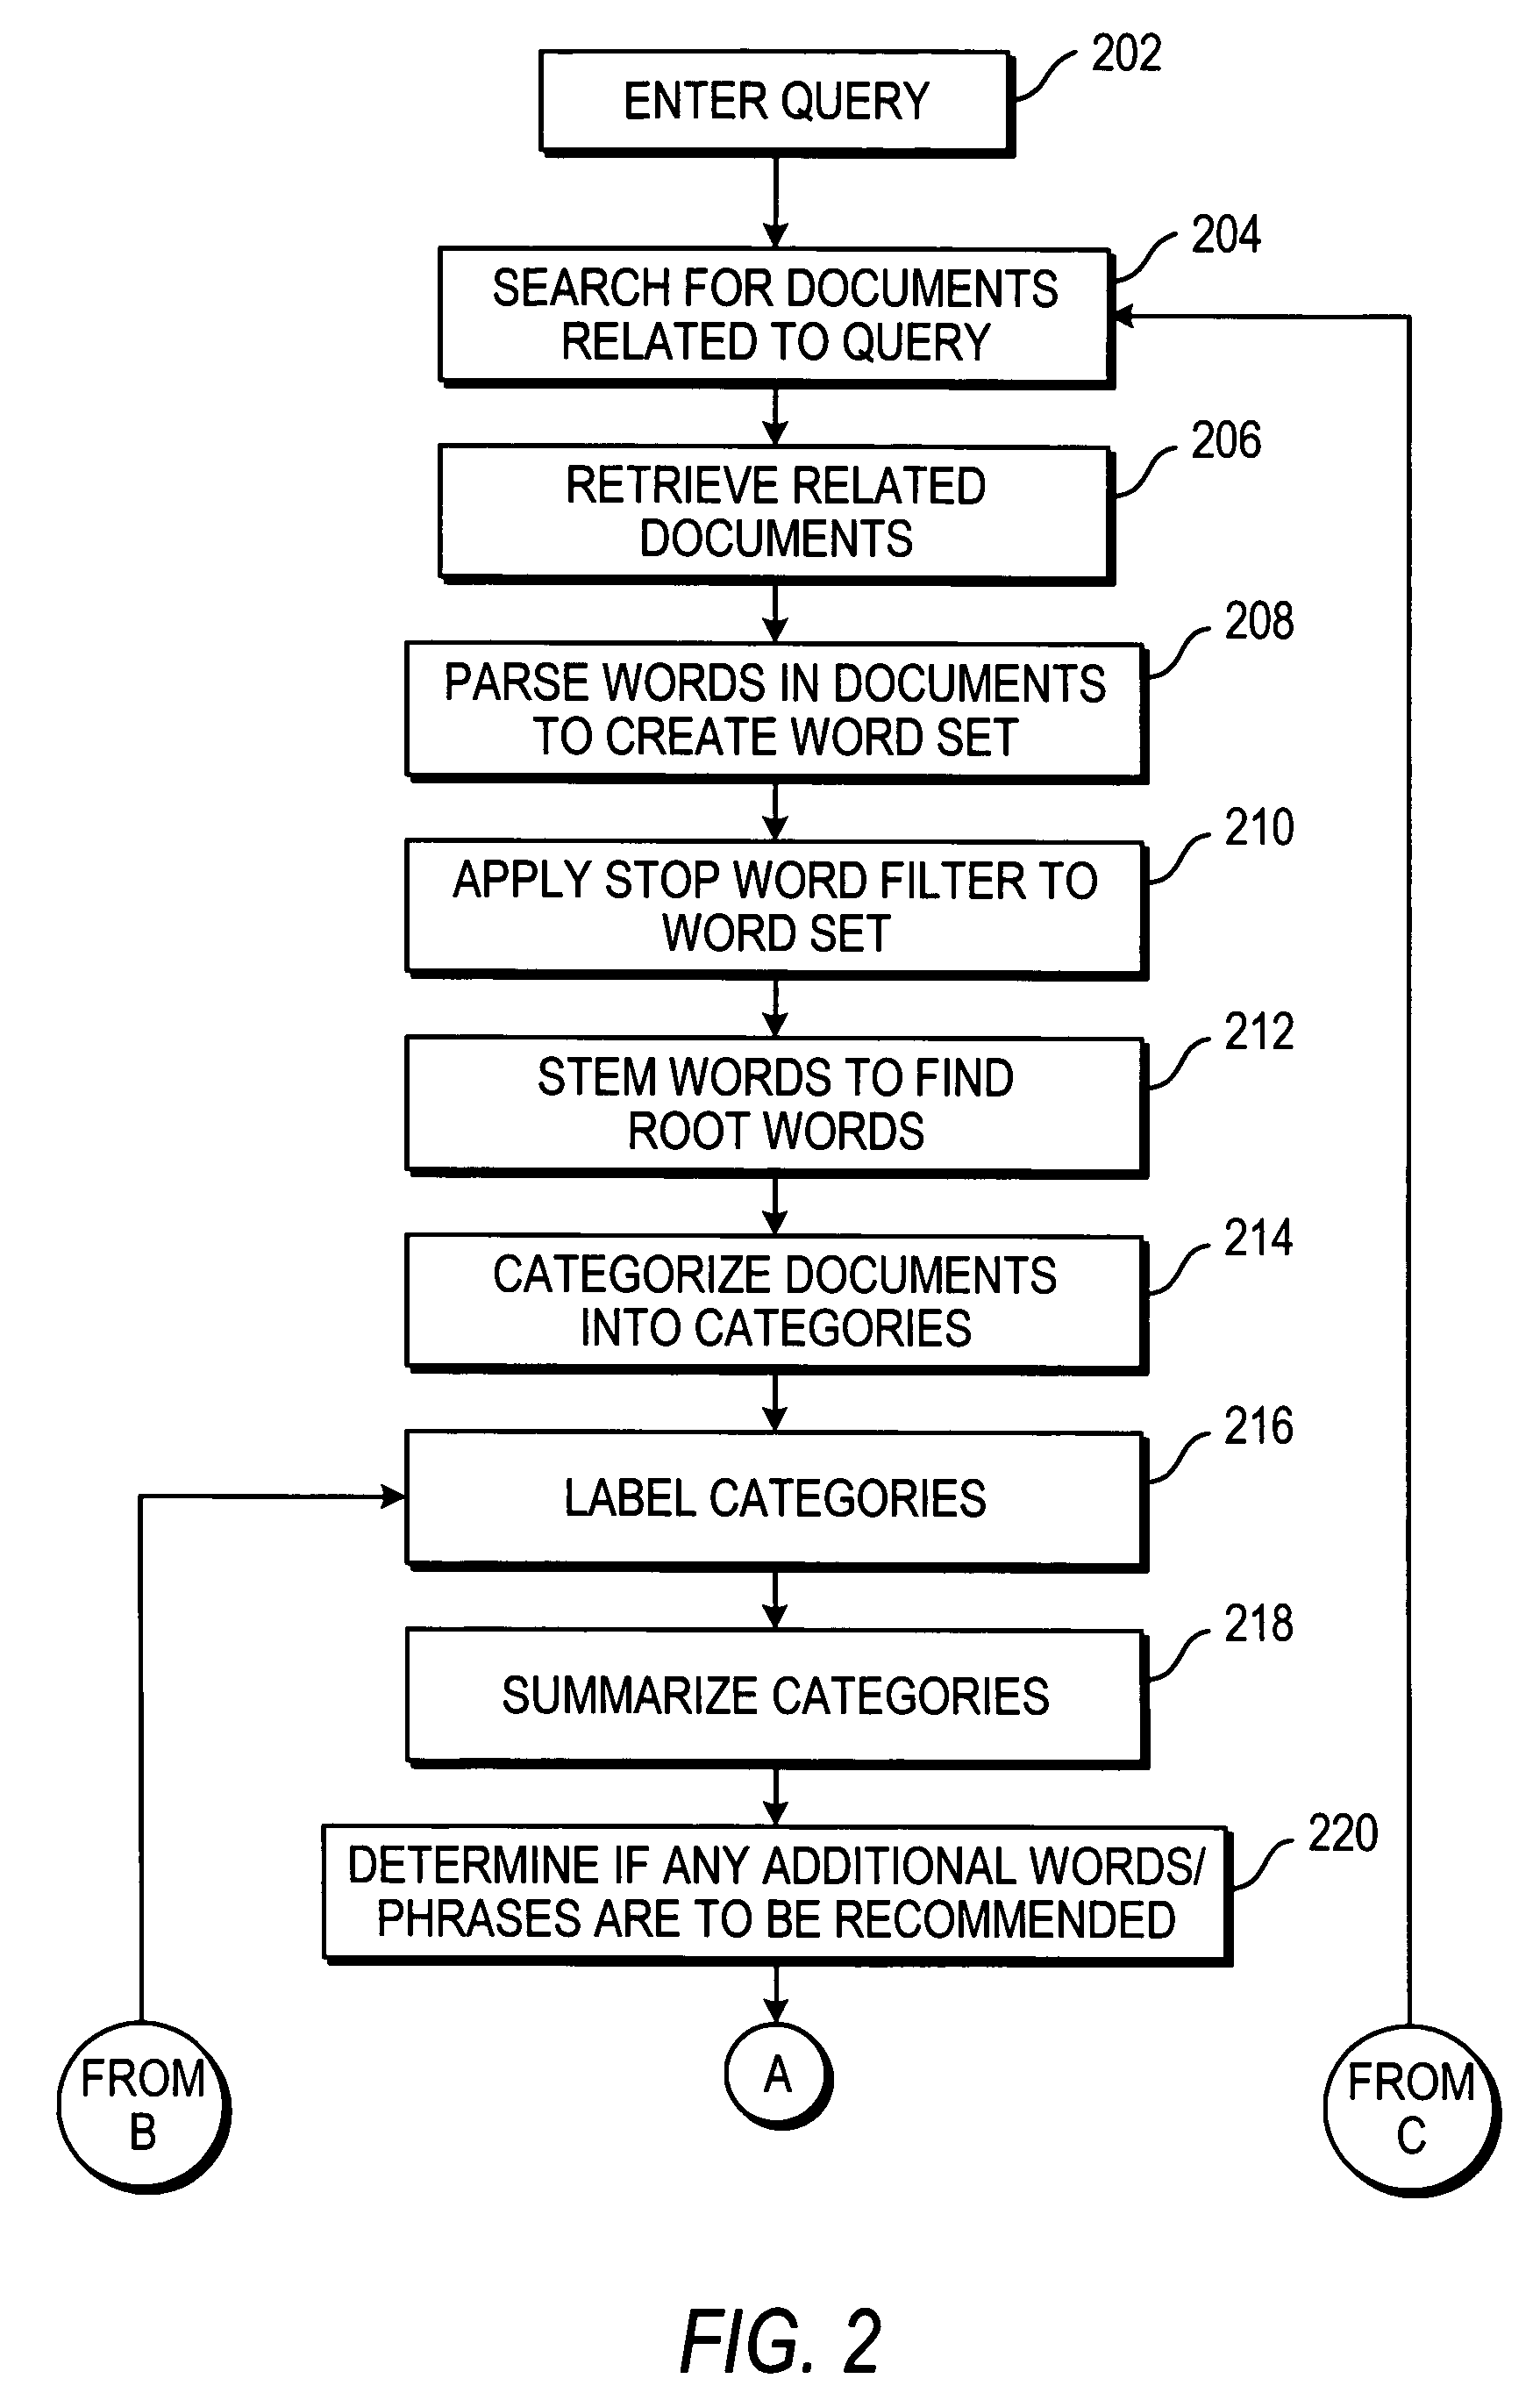 Systems and methods for document searching and organizing